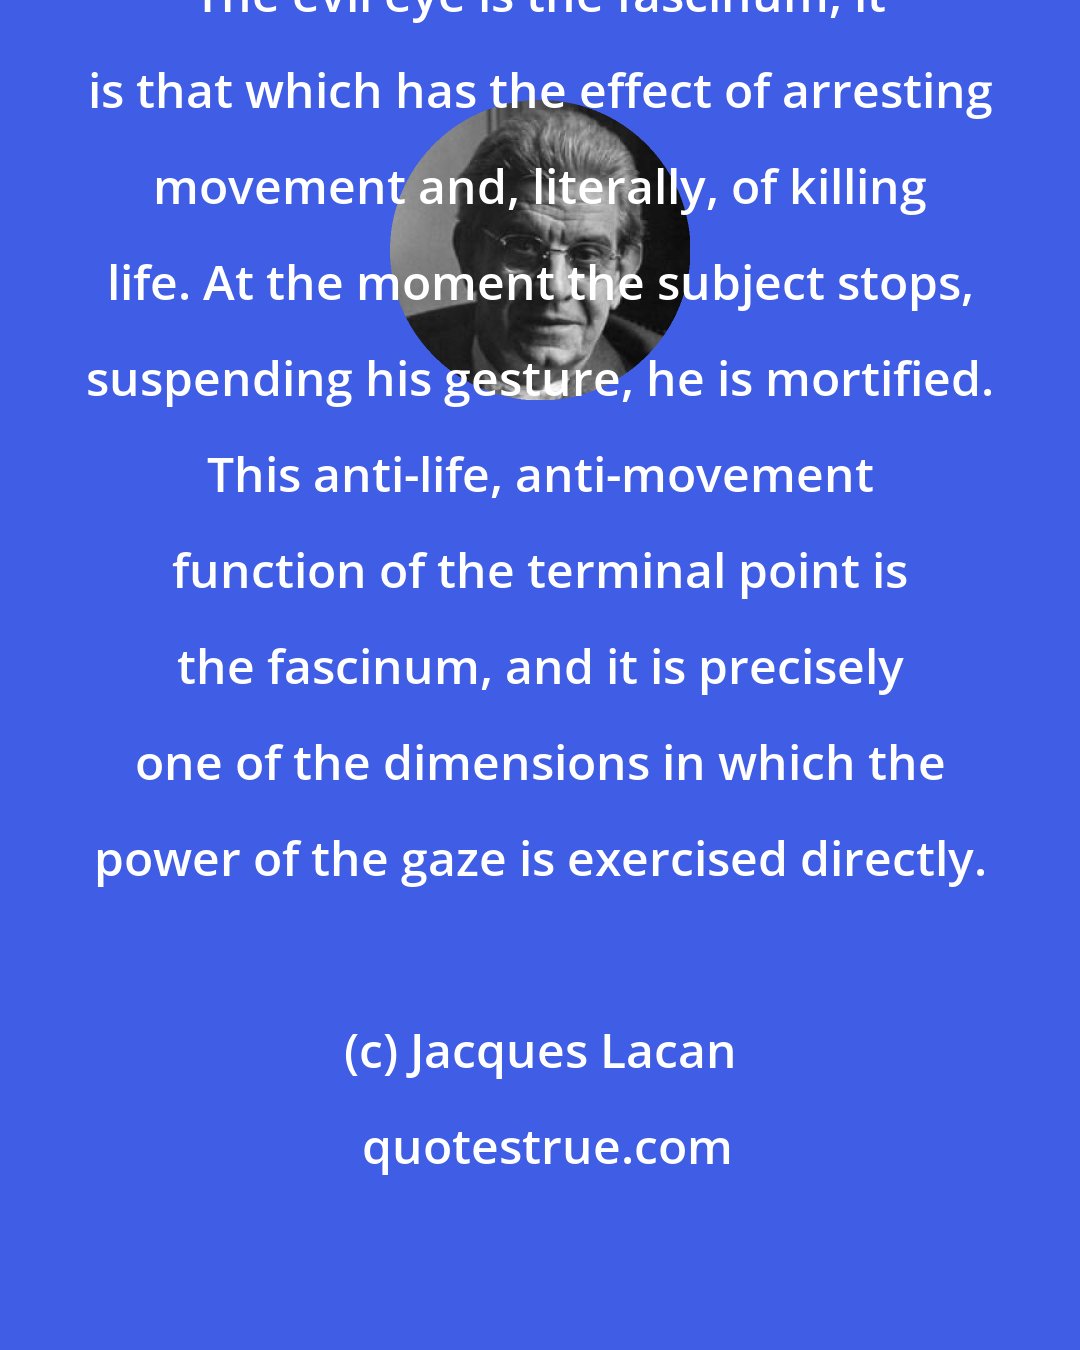 Jacques Lacan: The evil eye is the fascinum, it is that which has the effect of arresting movement and, literally, of killing life. At the moment the subject stops, suspending his gesture, he is mortified. This anti-life, anti-movement function of the terminal point is the fascinum, and it is precisely one of the dimensions in which the power of the gaze is exercised directly.